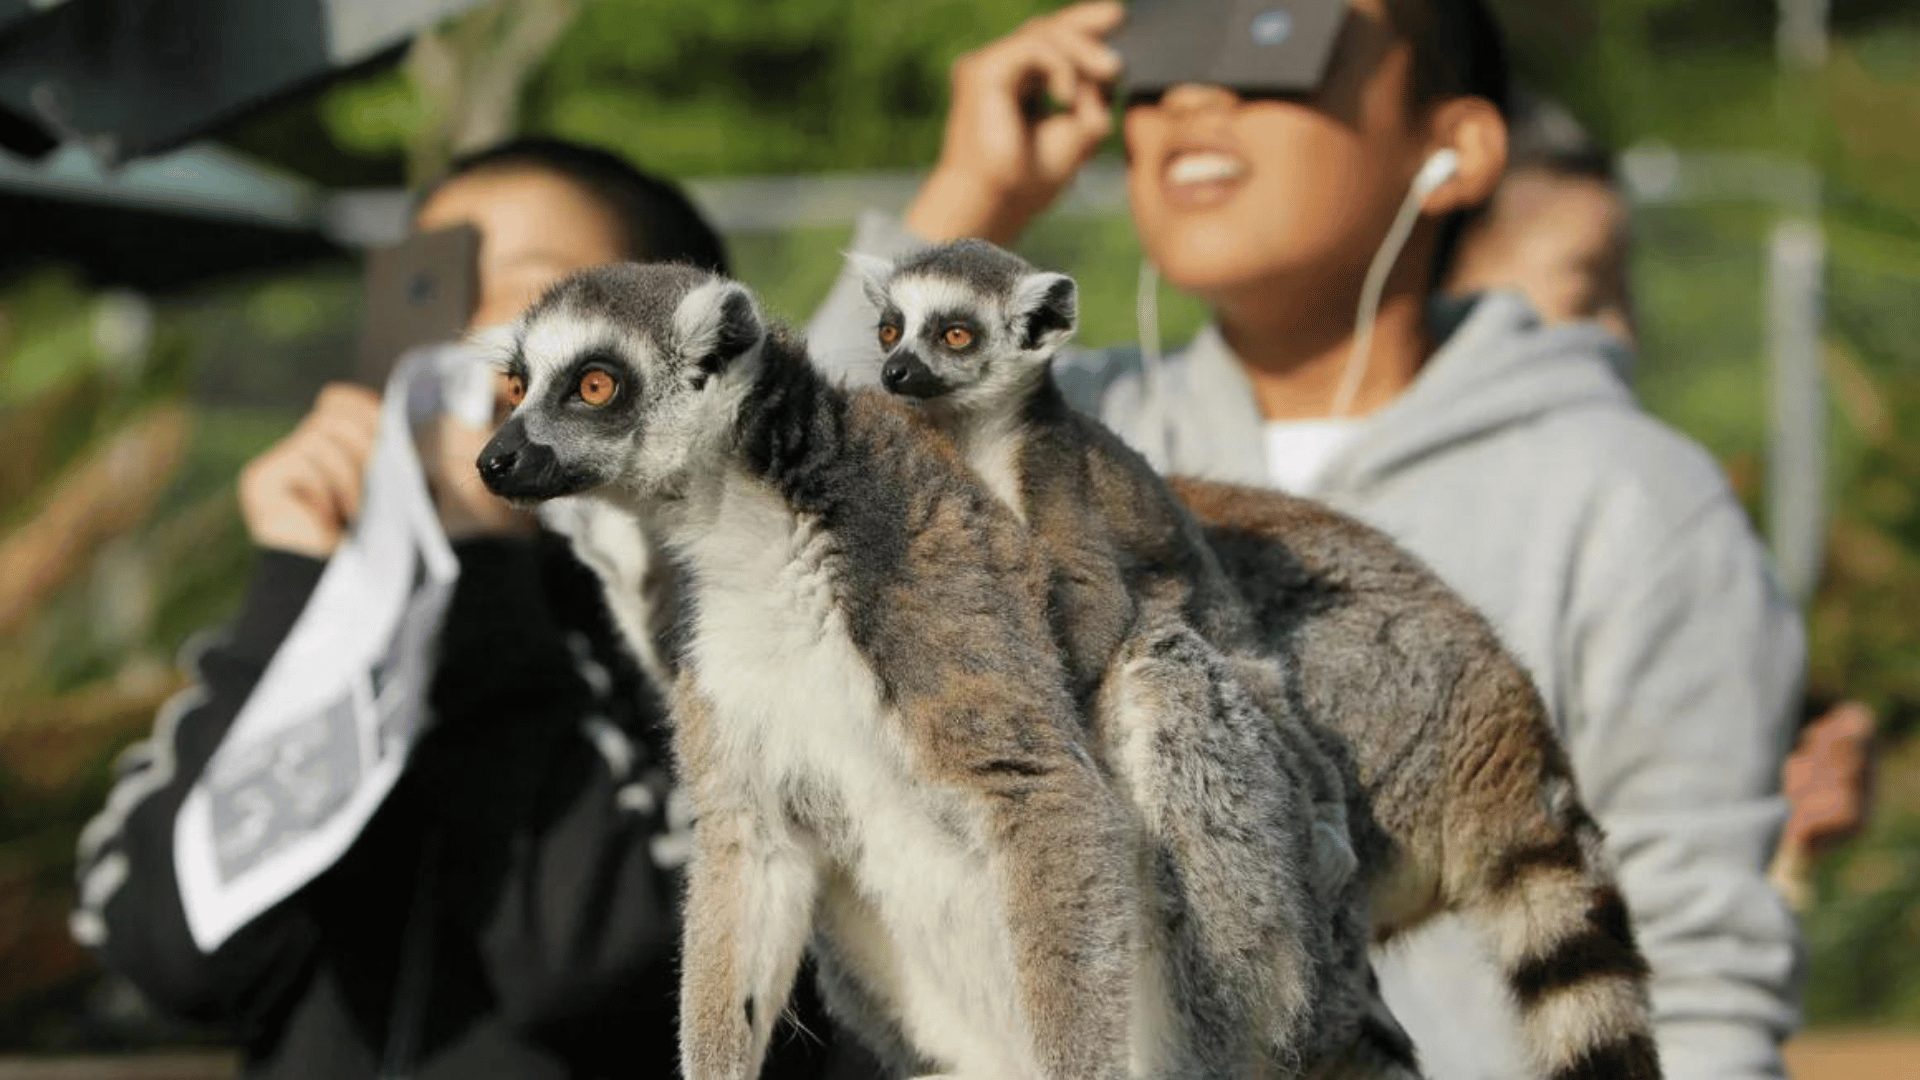 During a solar eclipse in May 2012, ring-tailed lemurs at the Japan Monkey Center in Inuyama skipped breakfast and clambered among trees and poles. CNN